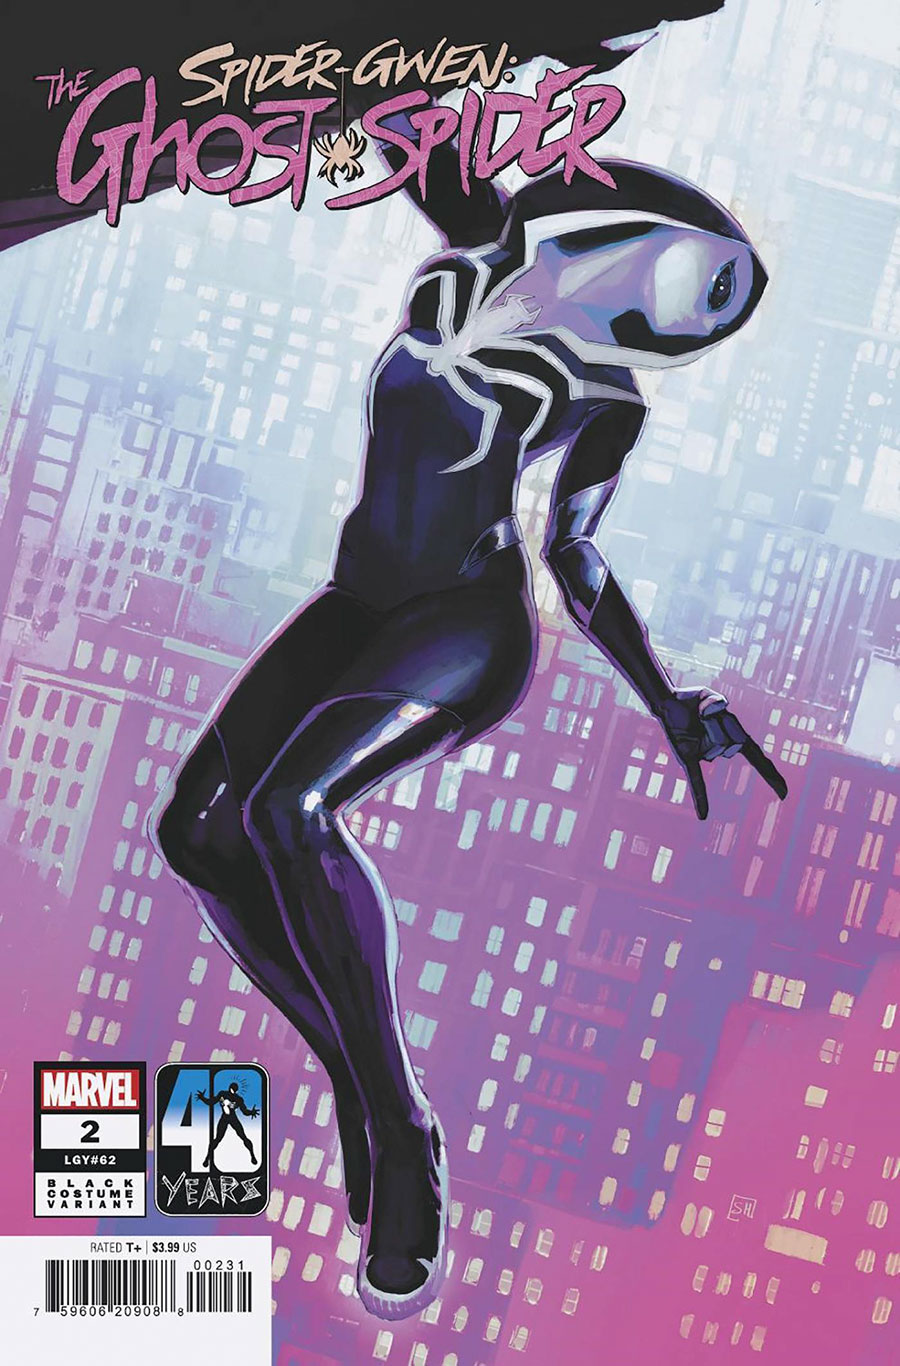 Spider-Gwen Ghost-Spider Vol 2 #2 Cover B Variant Stephanie Hans Black Costume Cover